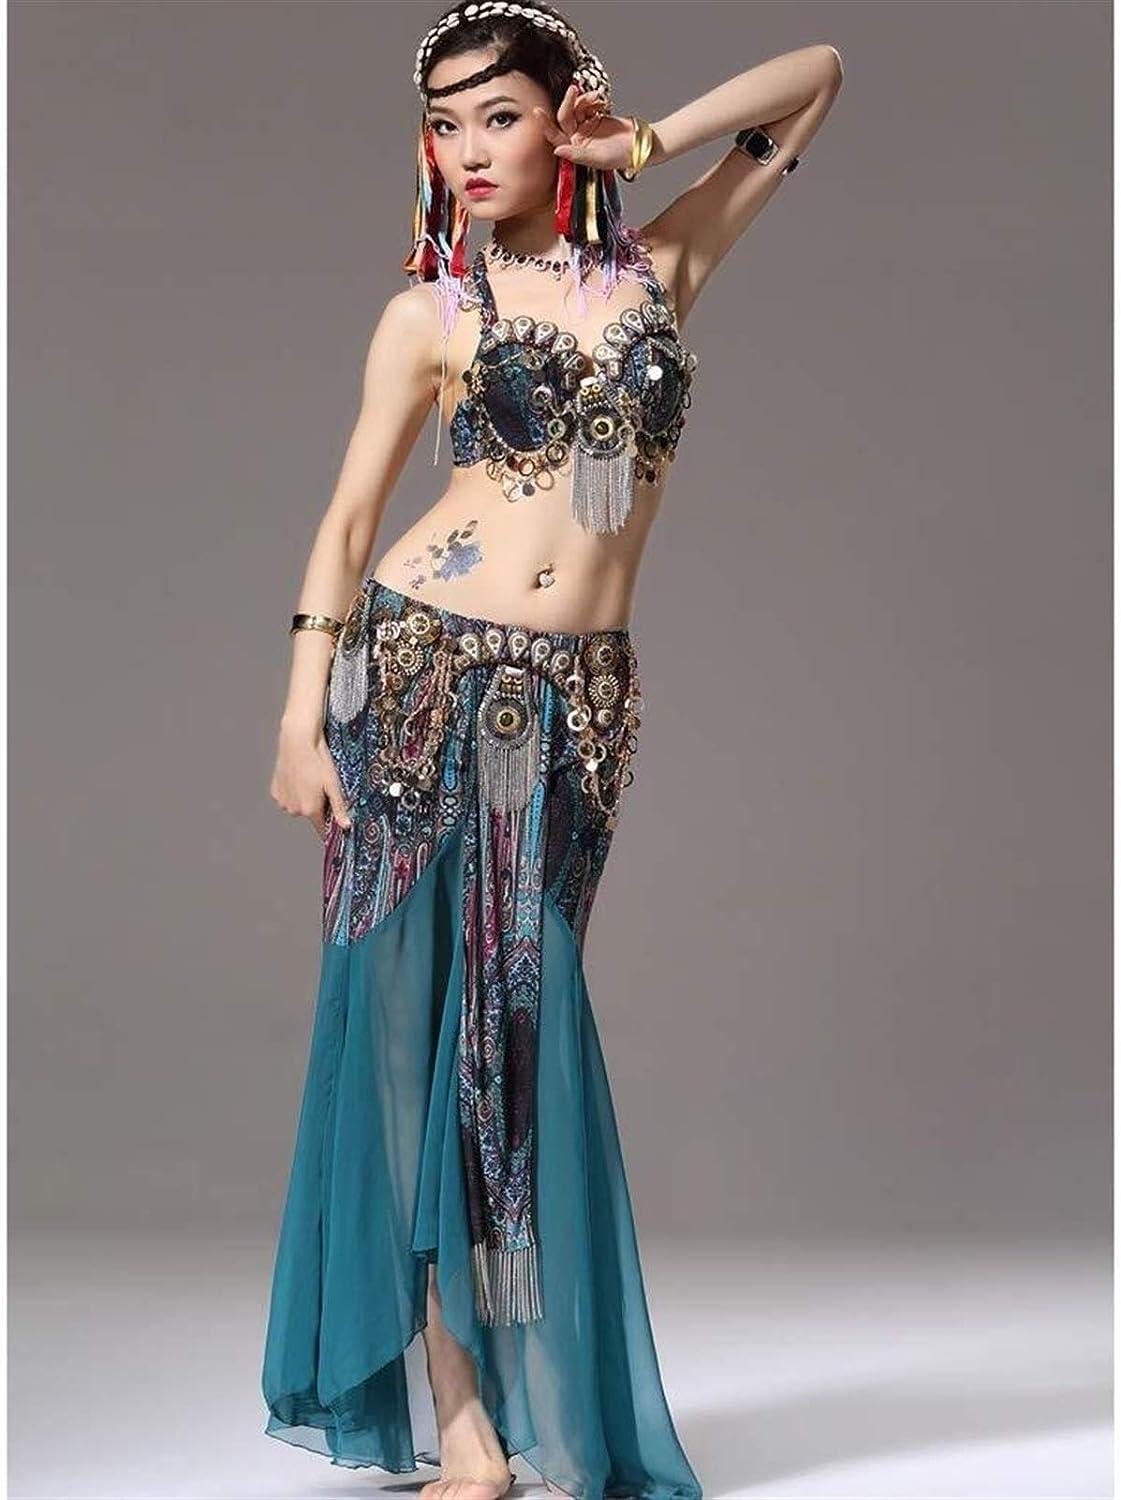 Buy ROYAL SMEELA Belly Dance Costume for Women Chiffon Belly Dancing Skirt  Belly Dancing Belt and Bra Armbands Belly Dance Outfit Pink at Amazon.in